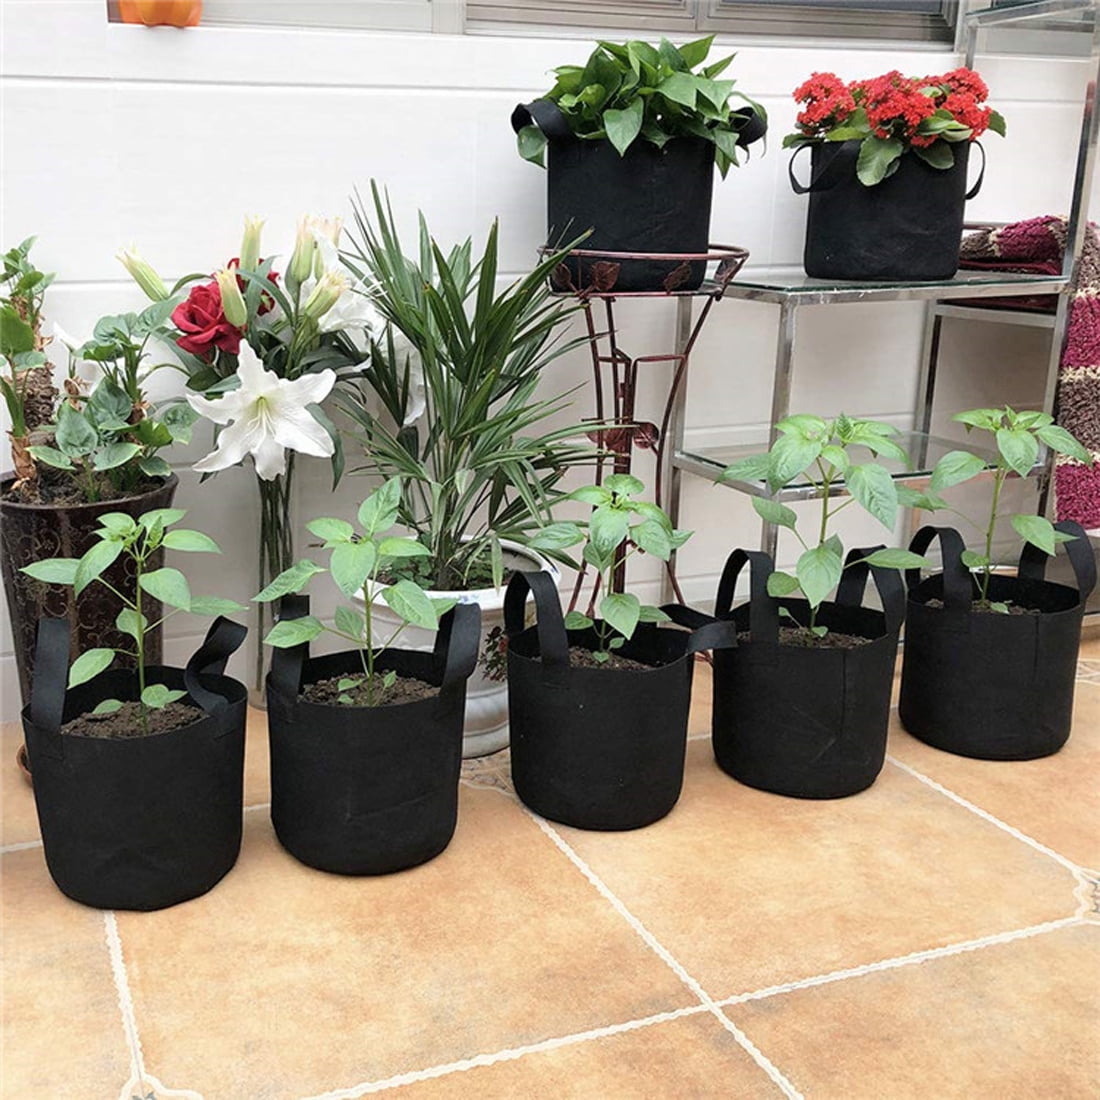 Details about   20 Gallon Grow Bags Fabric Pots Root Pouch w/ Handles Planting Container Fruit 